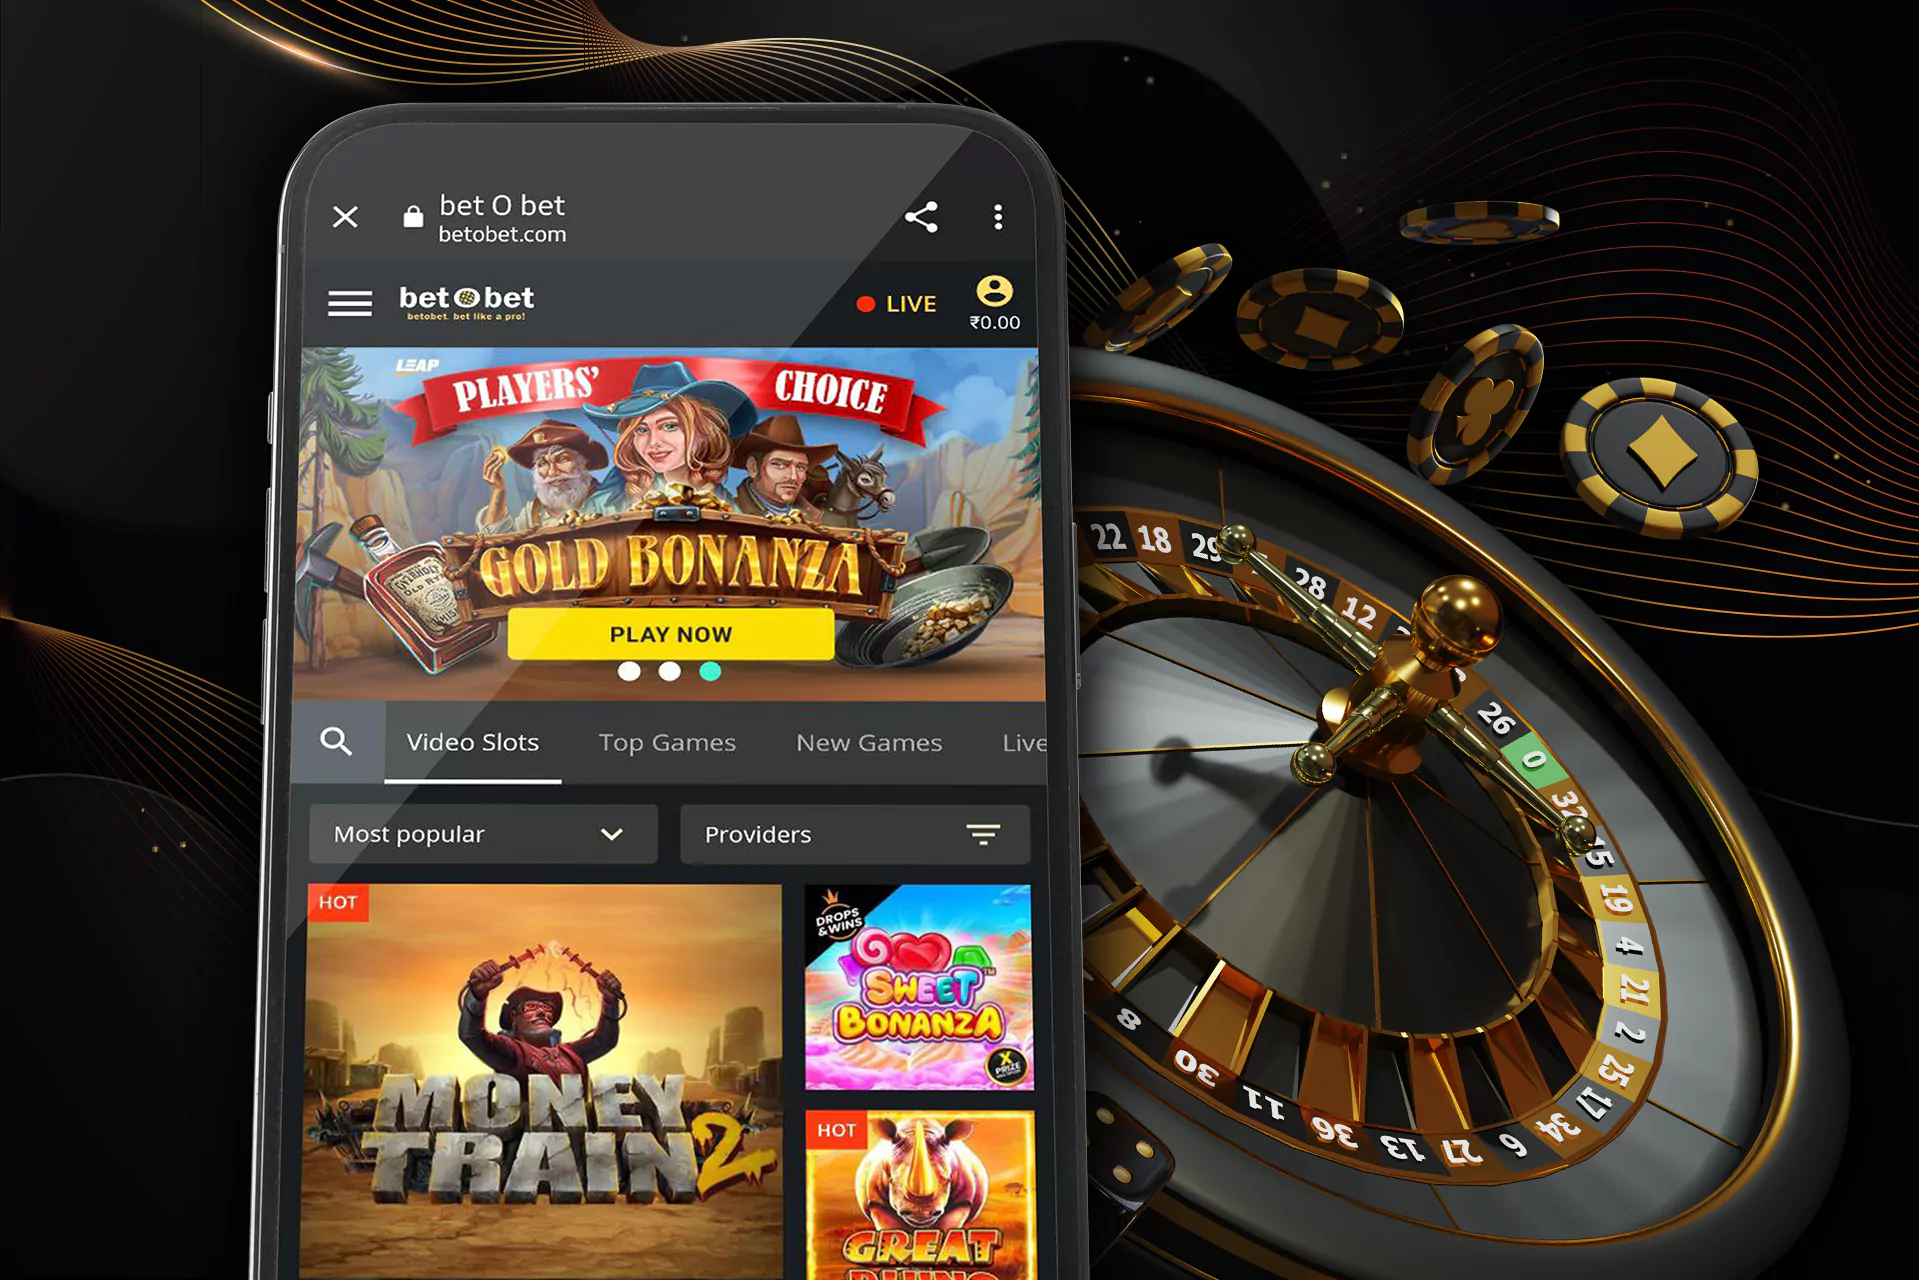 There are a lot of casino games that you can play in the Bet O Bet app.